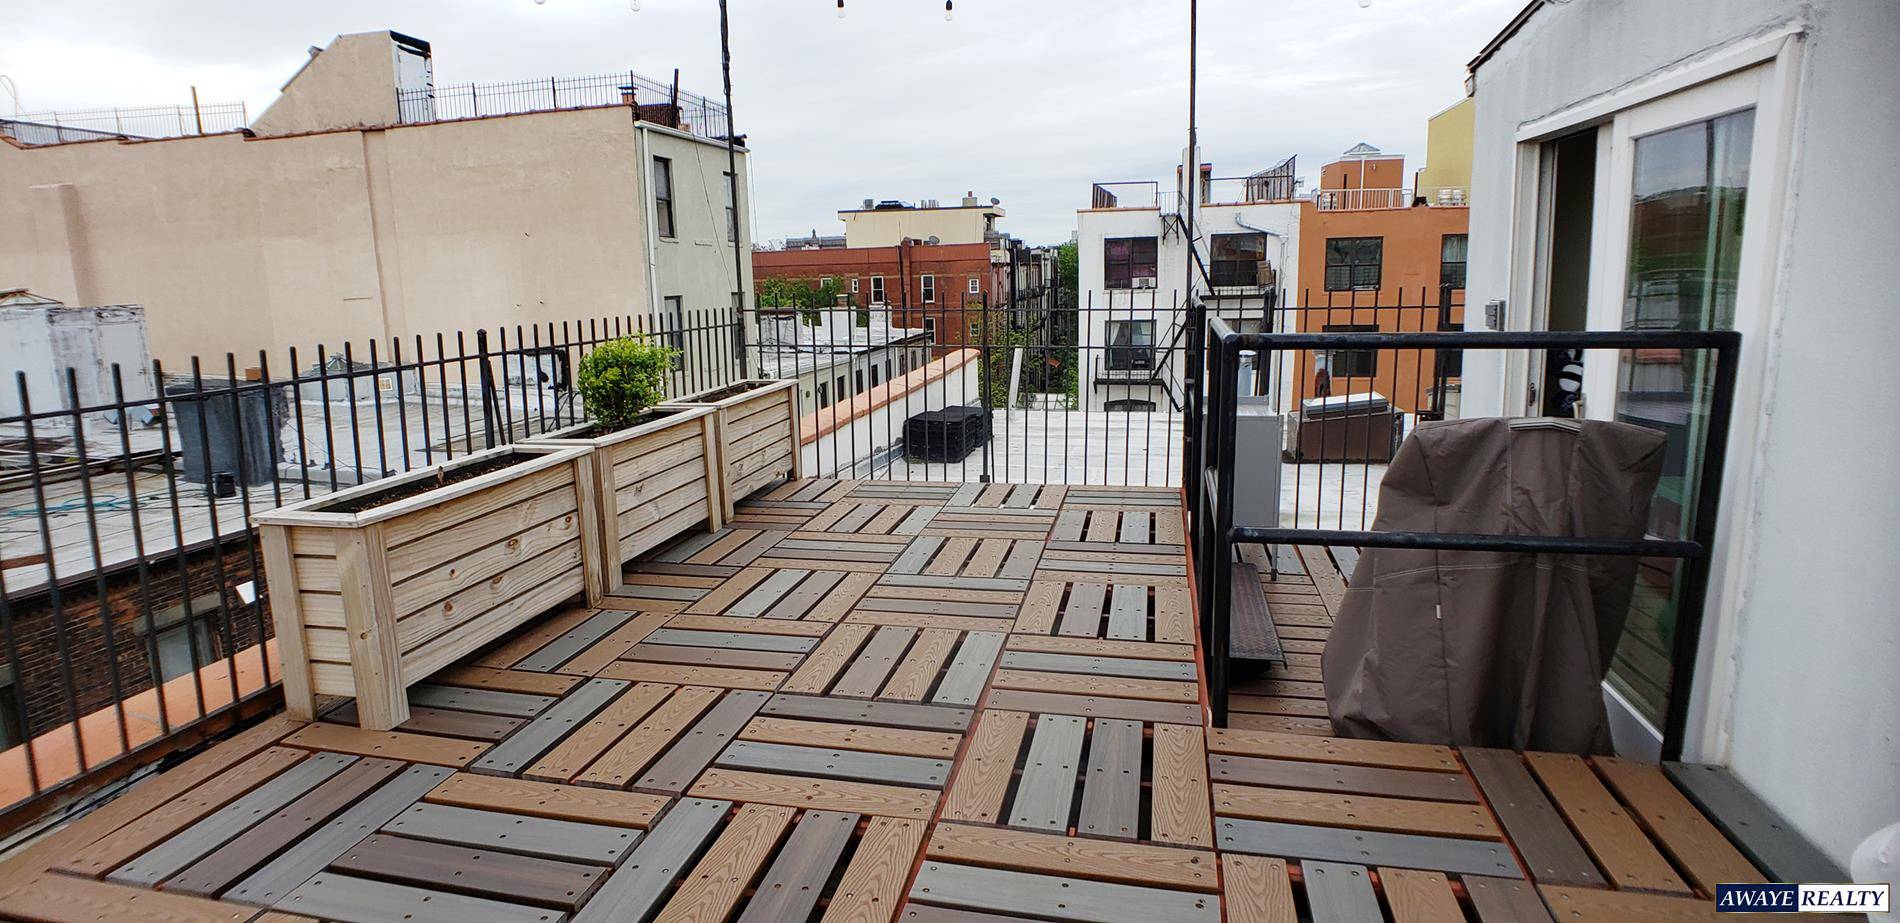 Incredible one bedroom one bathroom LOFT DUPLEX apartment with a private roof deck in a prime location of Park Slope !